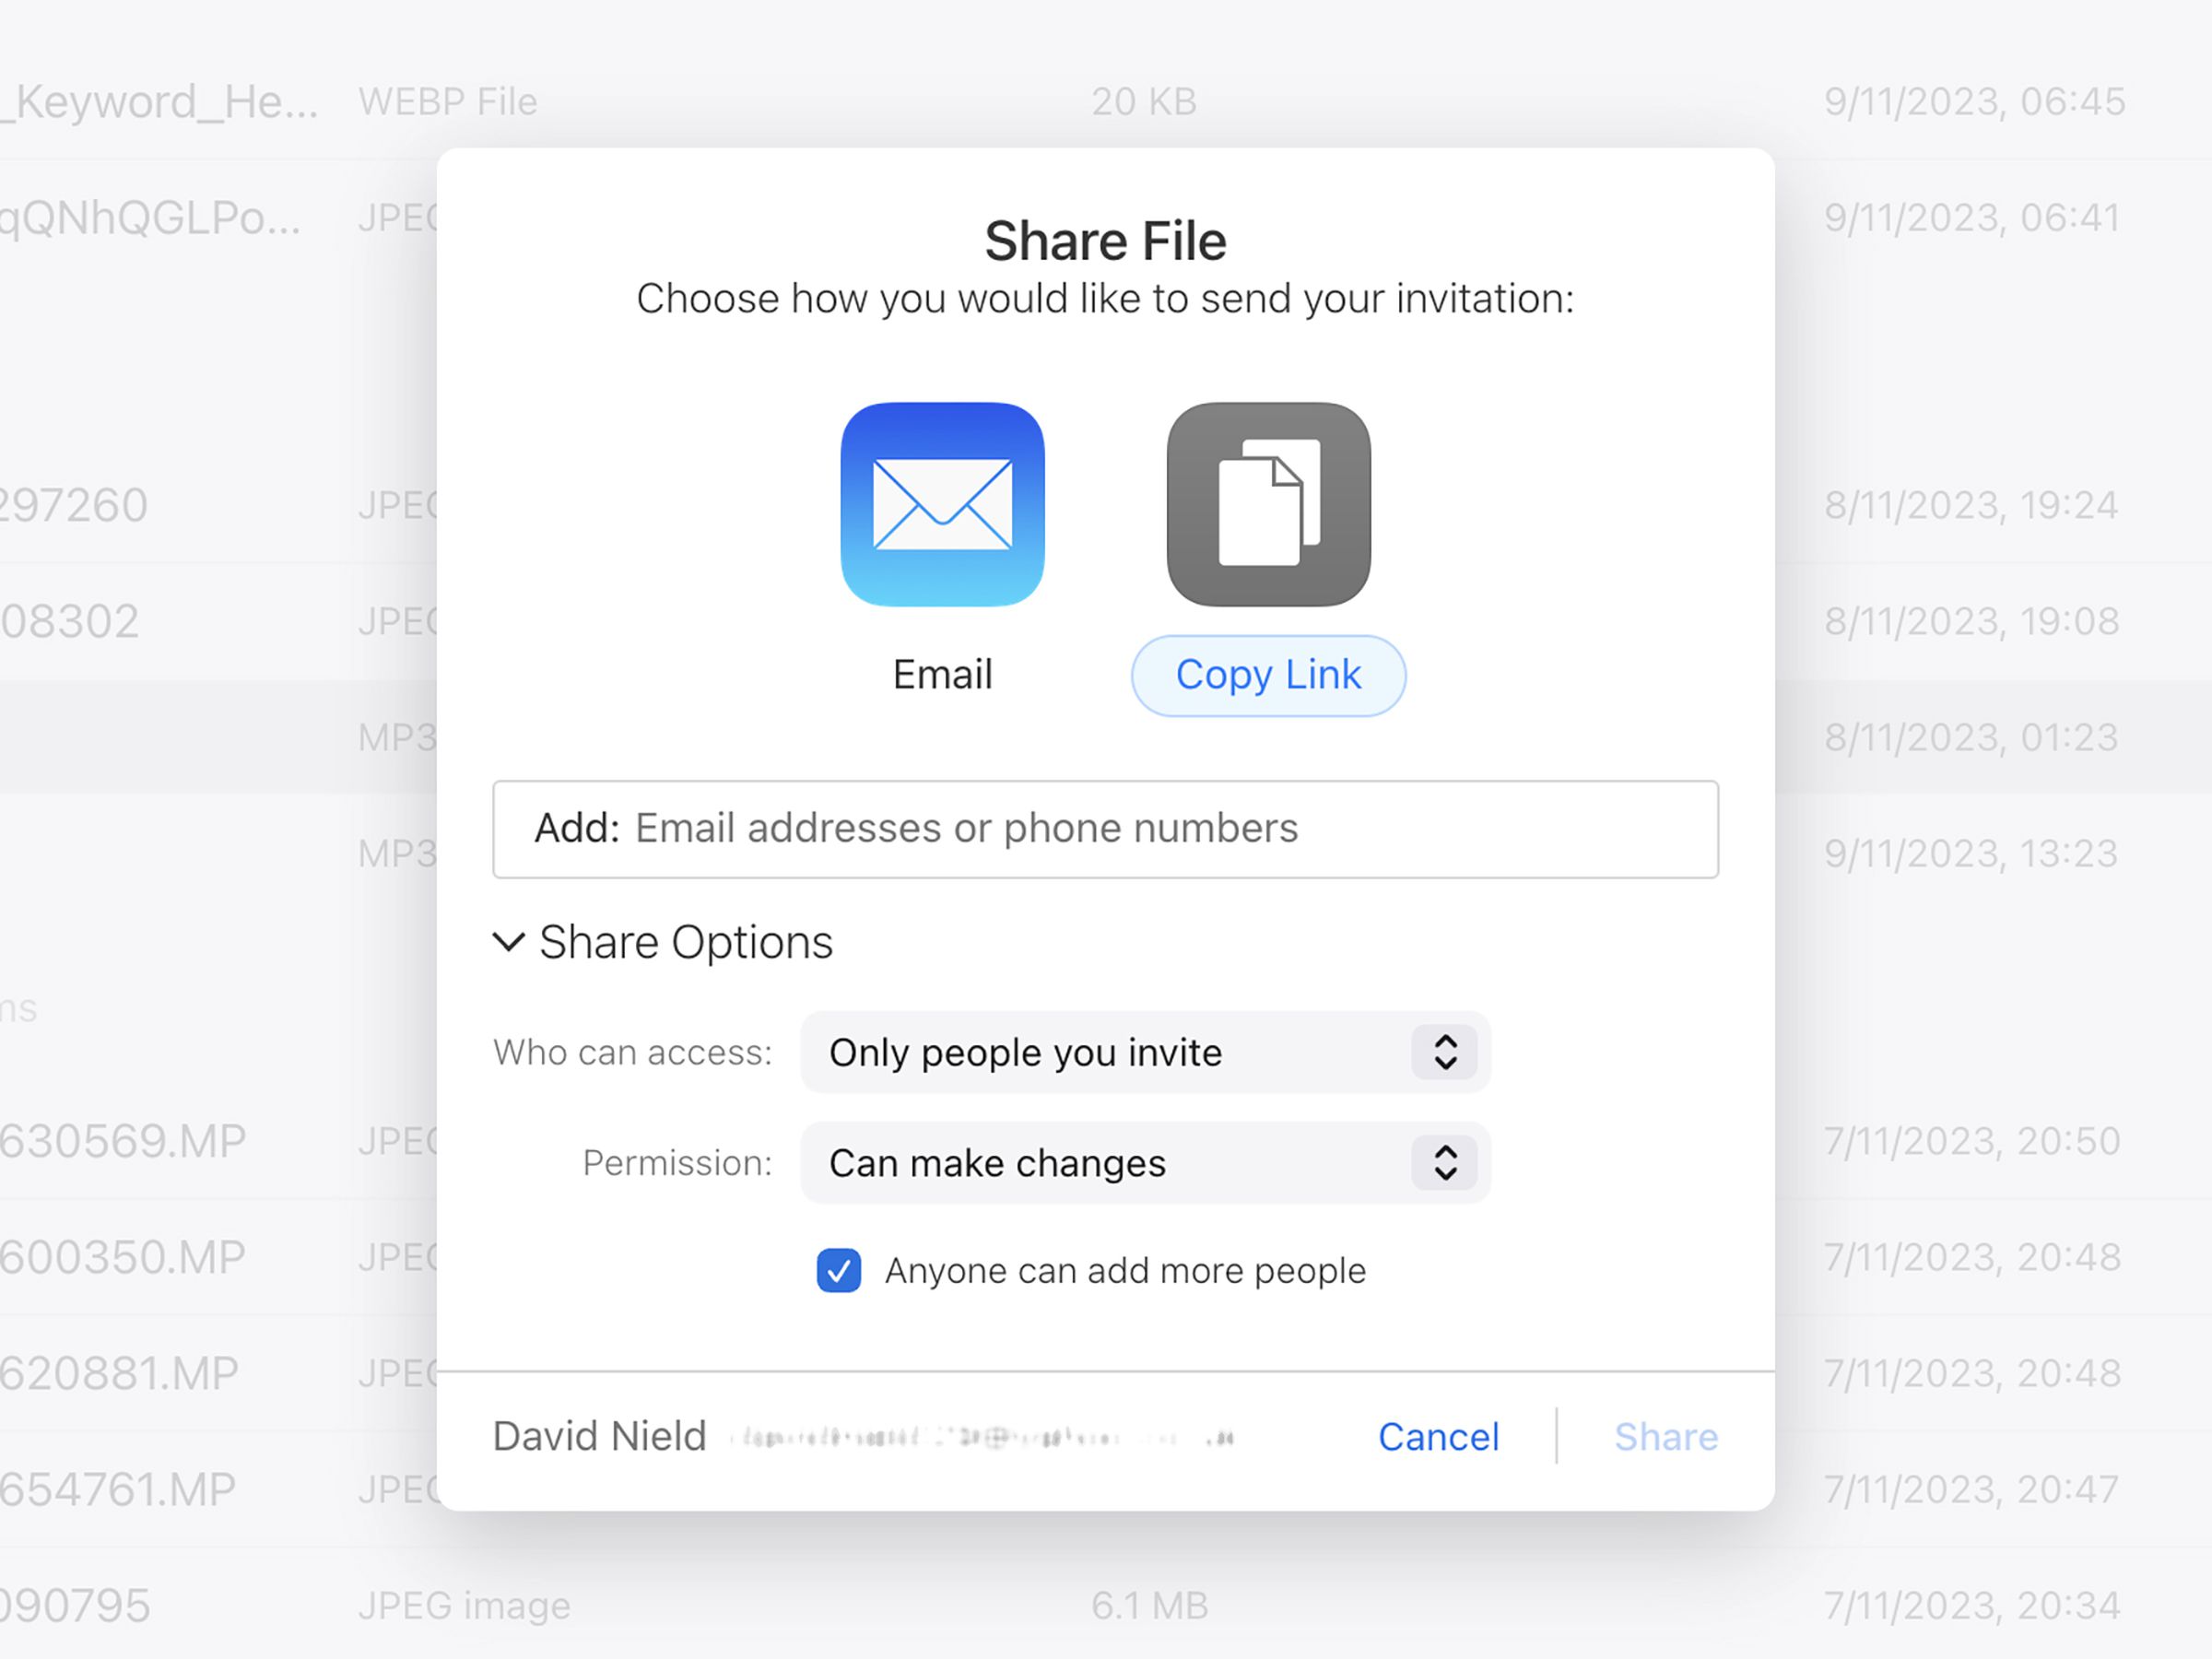 Pop-up box headed Share File, with icons for Email and Copy Like, a field for email addresses or phon numbers, and share options.